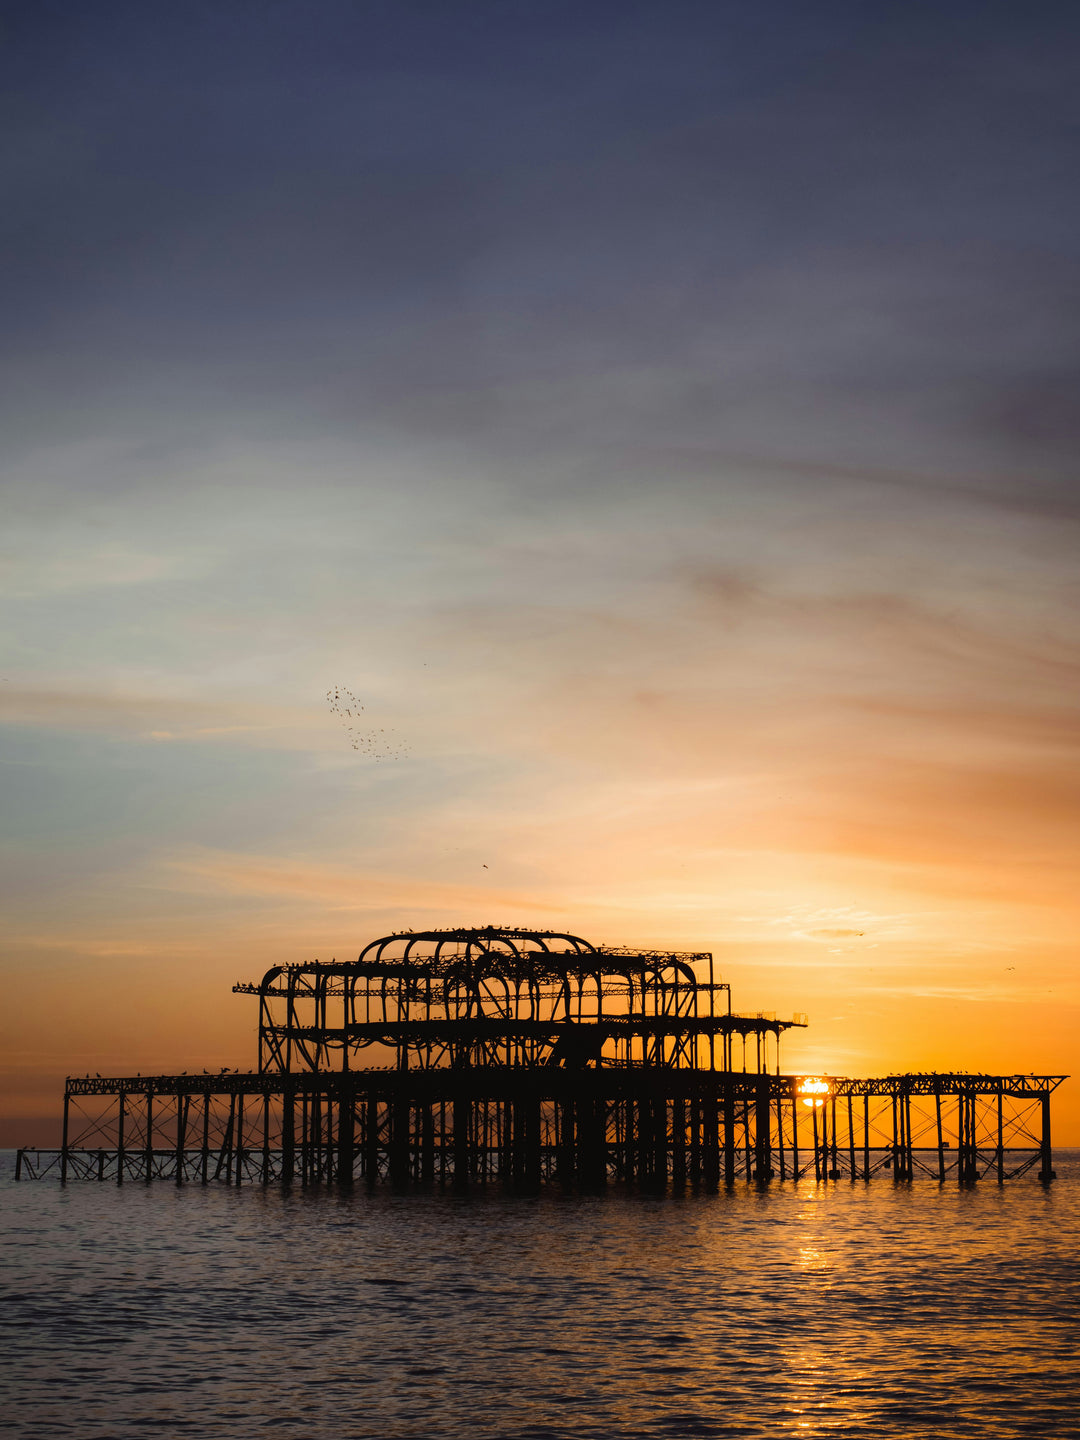 Brightons west pier at sunset Photo Print - Canvas - Framed Photo Print - Hampshire Prints